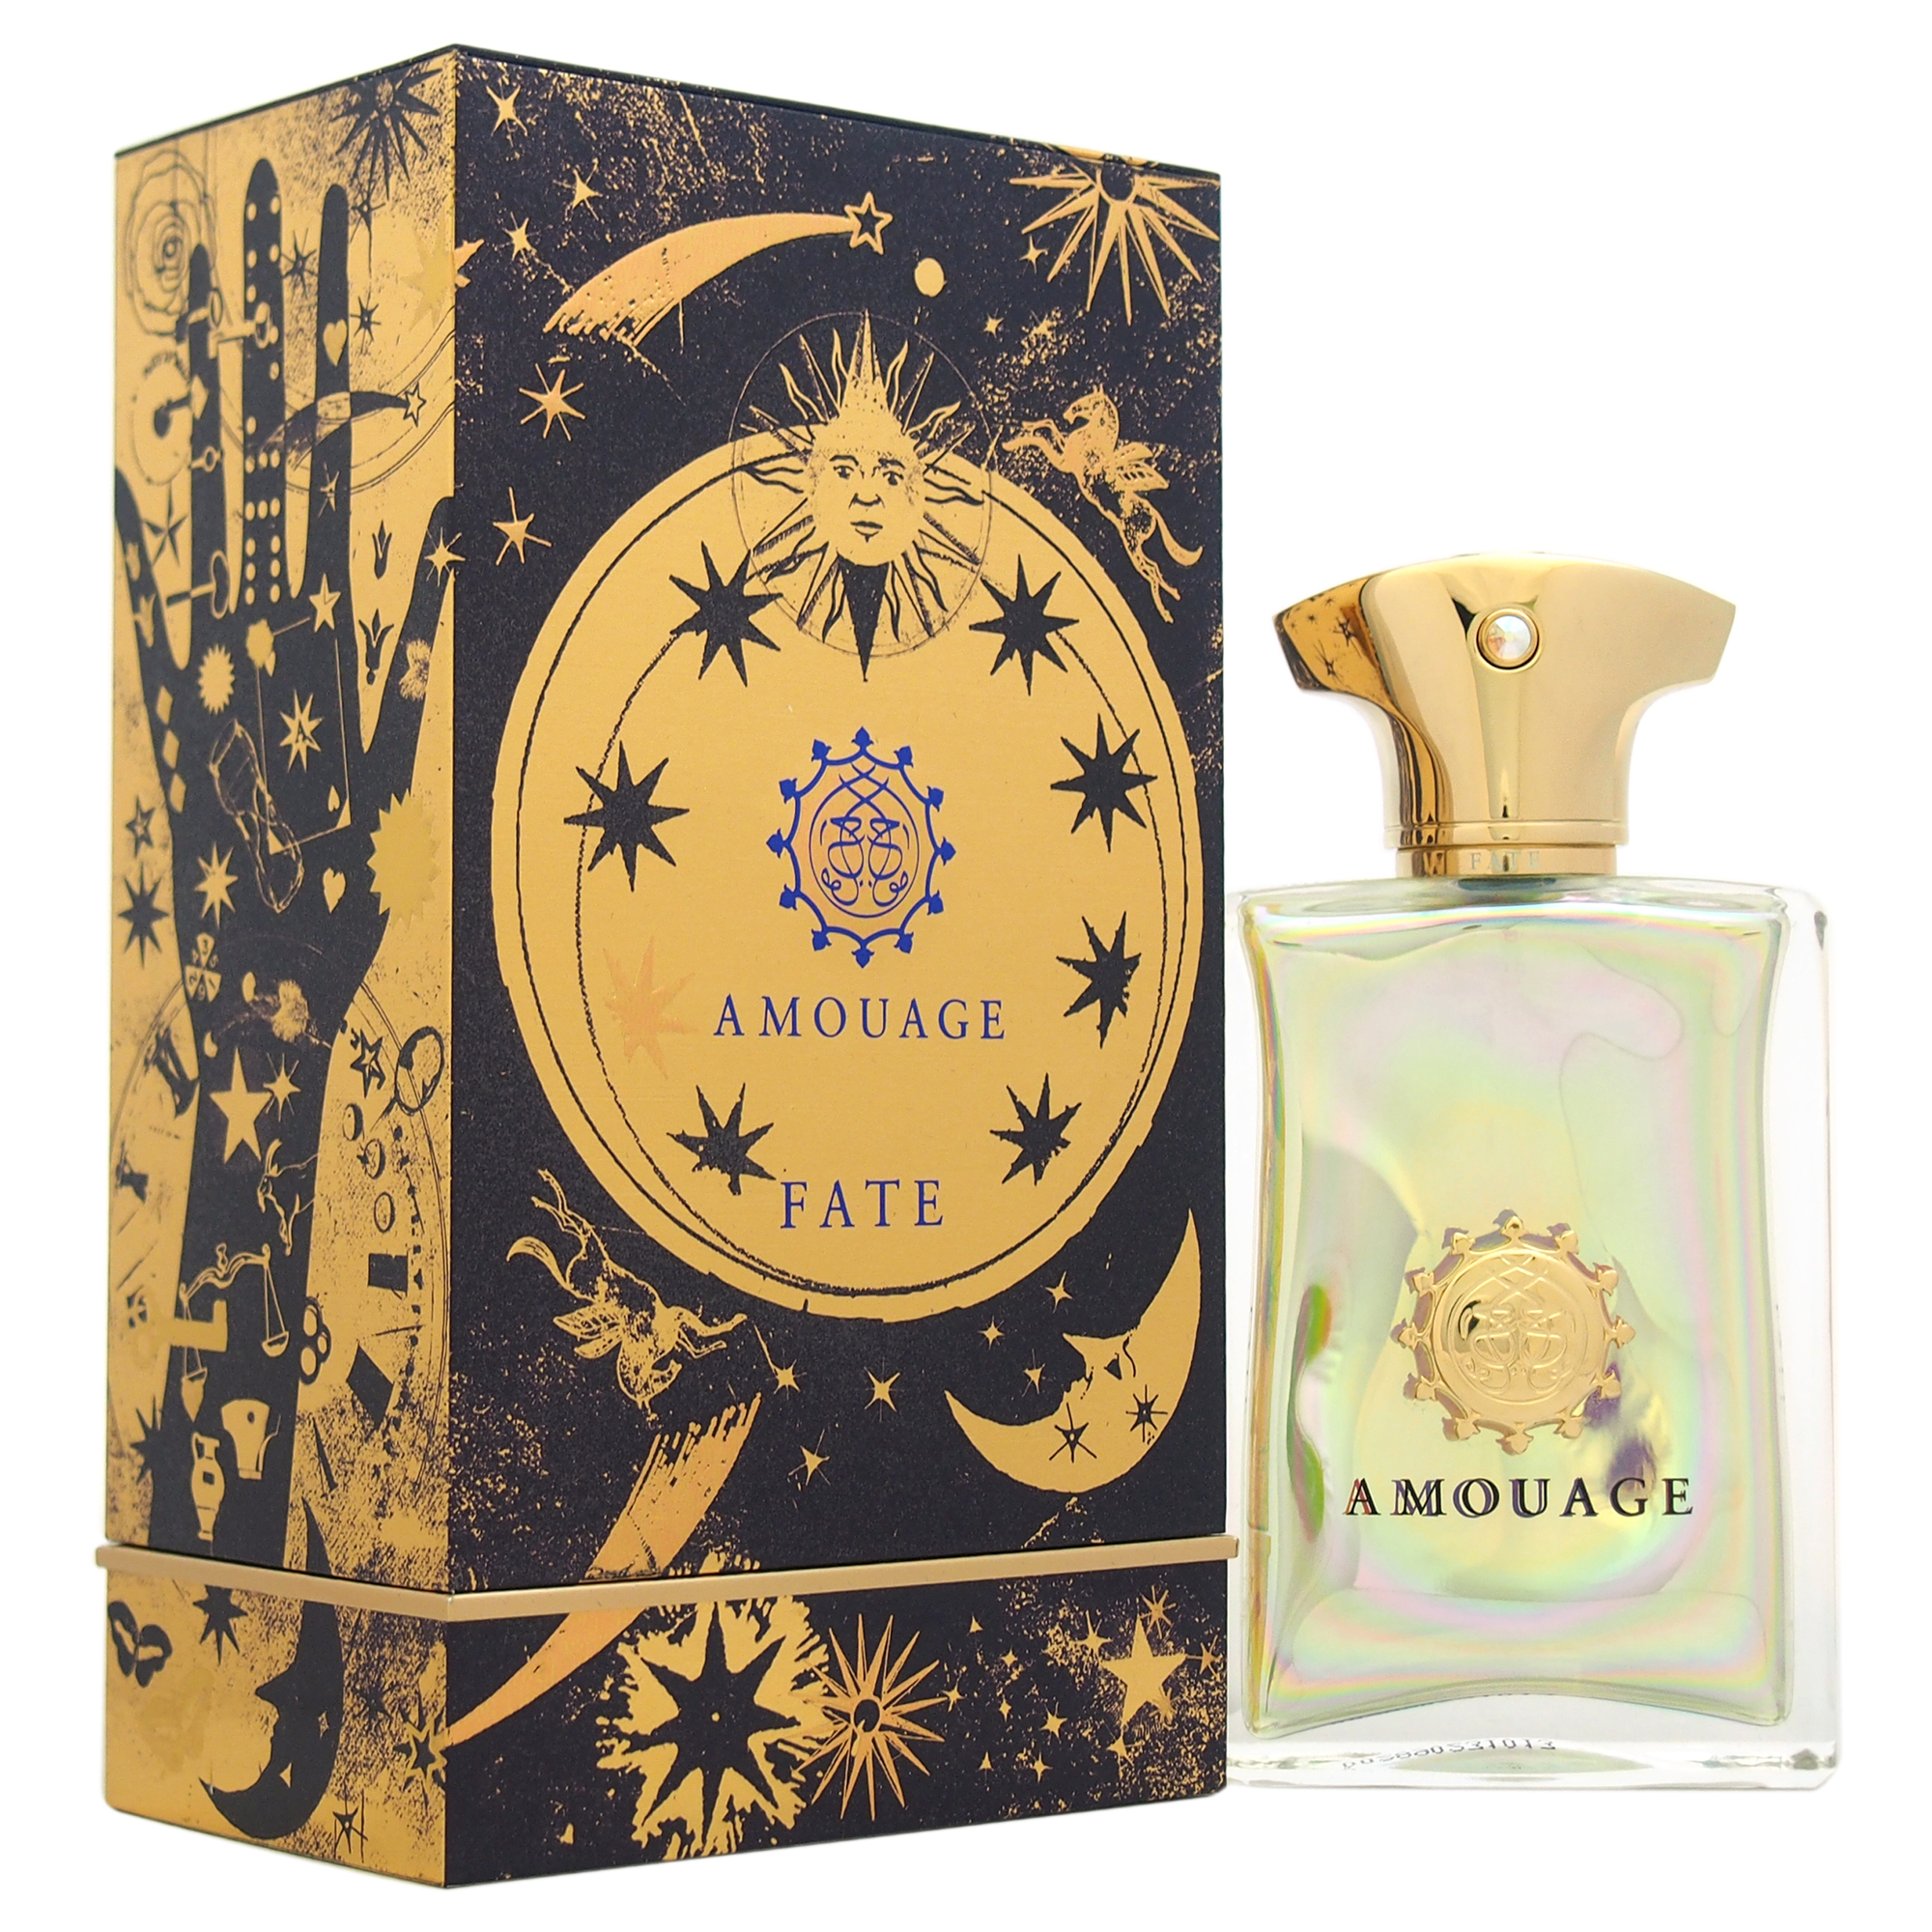 FATE by Amouage for Men - 3.4 oz EDP Spray